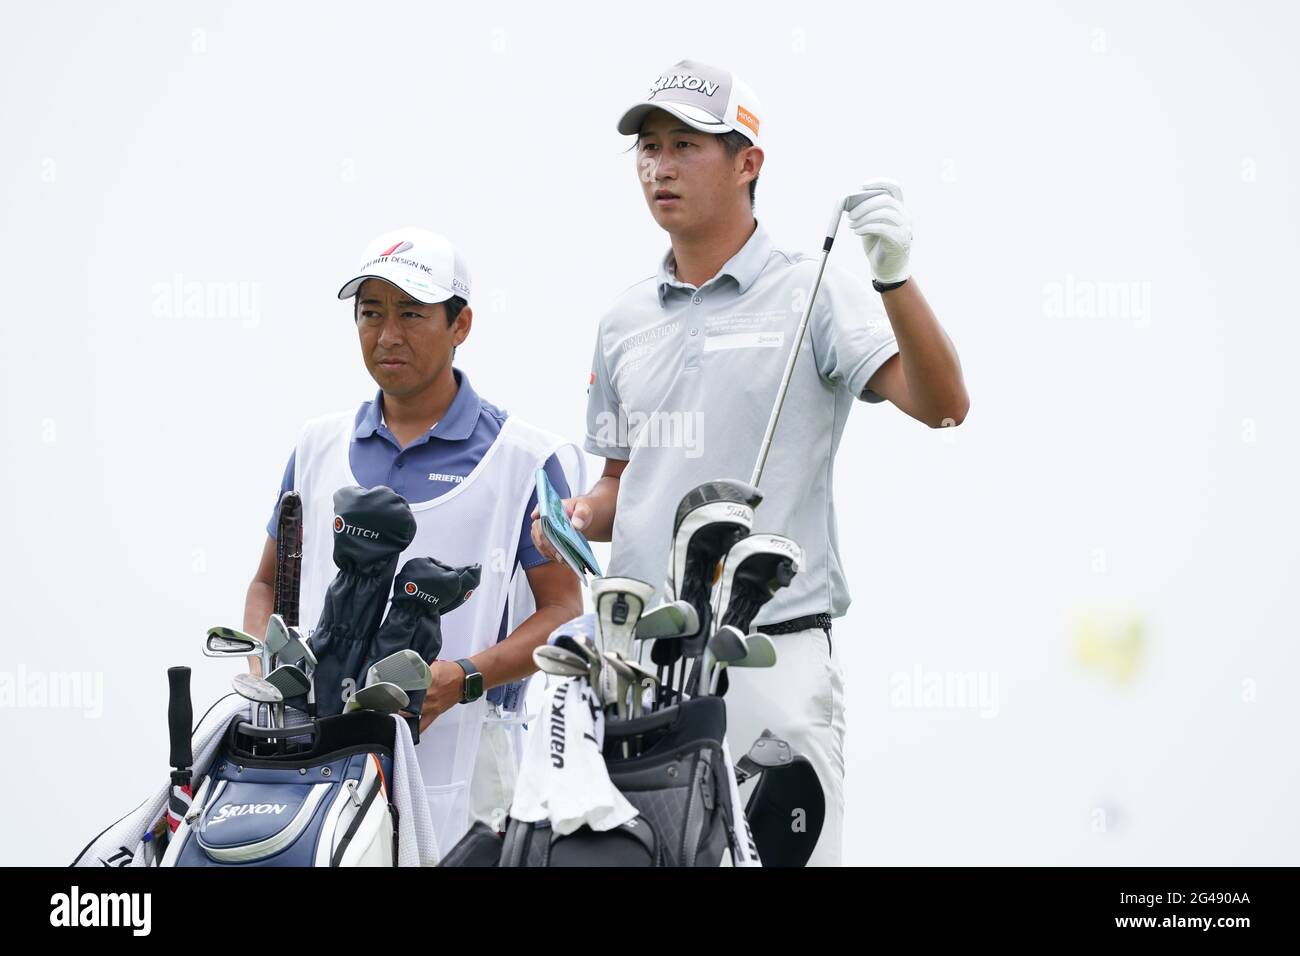 Rikuya Hoshino and caddie on the 8th hole during the third round of the 2021 U.S. Open Championship in golf at Torrey Pines Golf Course in San Diego, California, USA on June 19, 2021. Credit: J.D. Cuban/AFLO/Alamy Live News Stock Photo